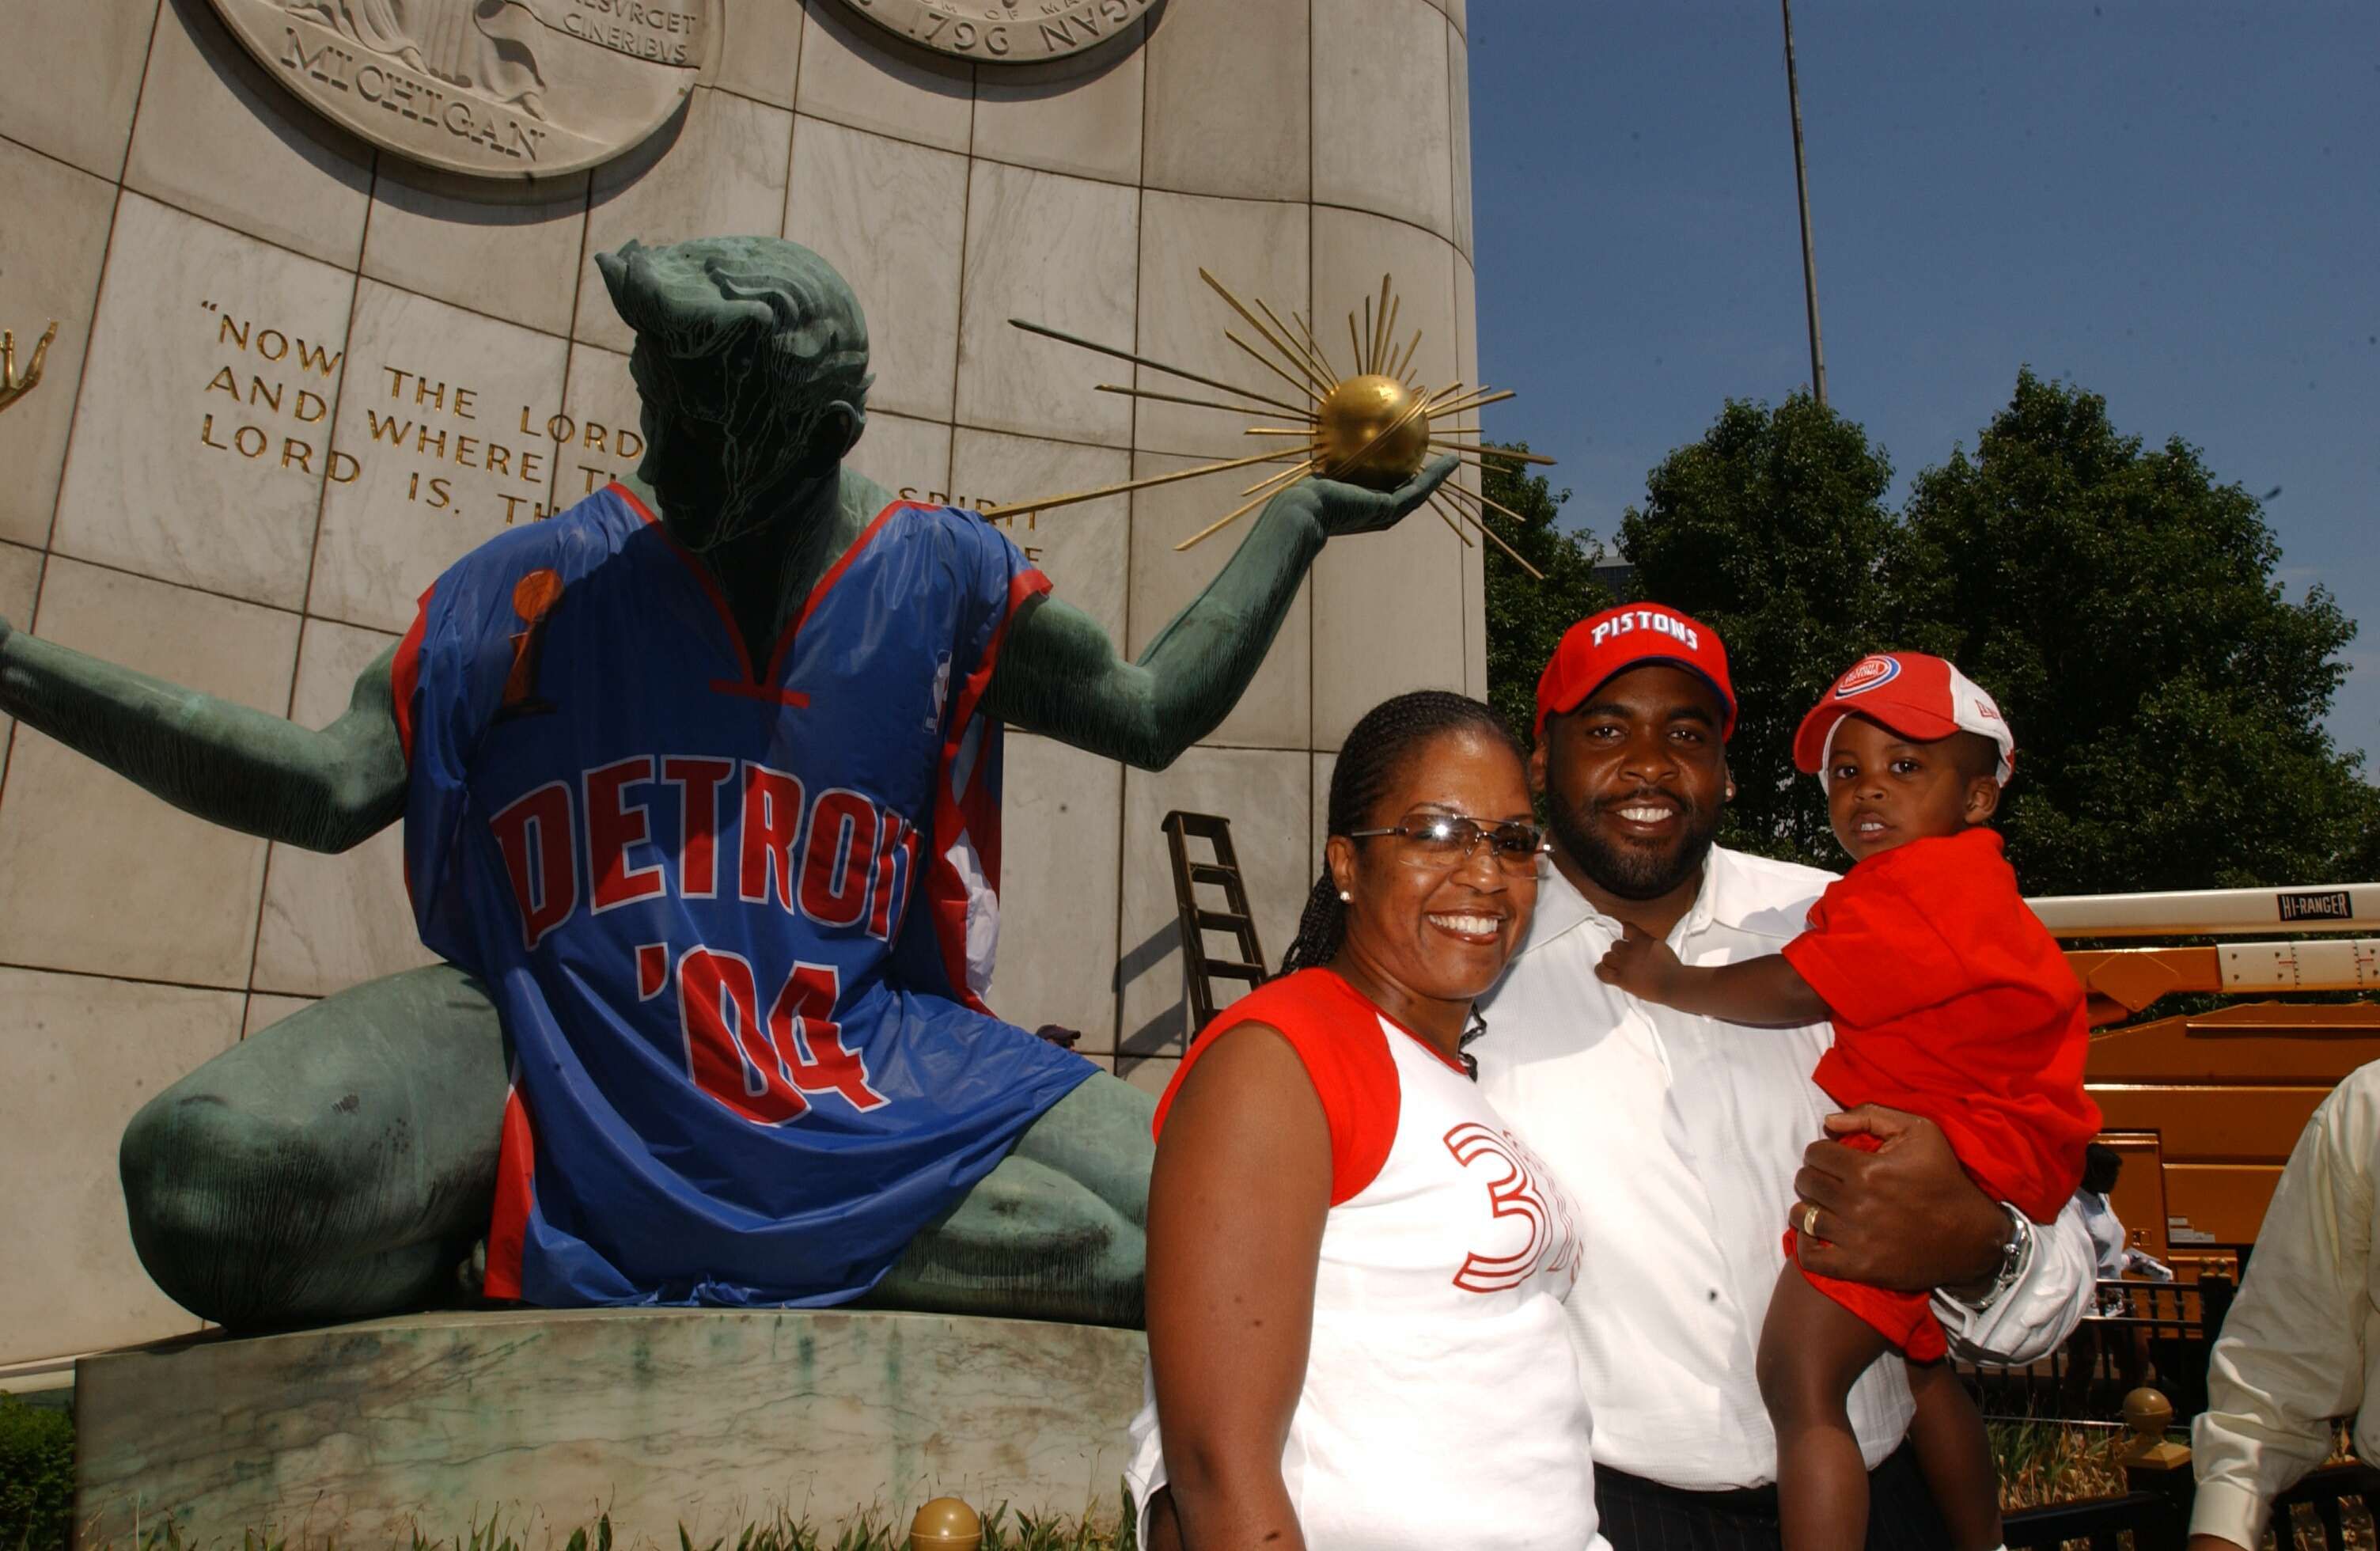 Kwame Kilpatrick and his family pose in front of the statue that wears an "'04" Pistons jersey to celebrate the team ahead of the 2004 Finals. (Photo by Allen Einstein via Getty Images)